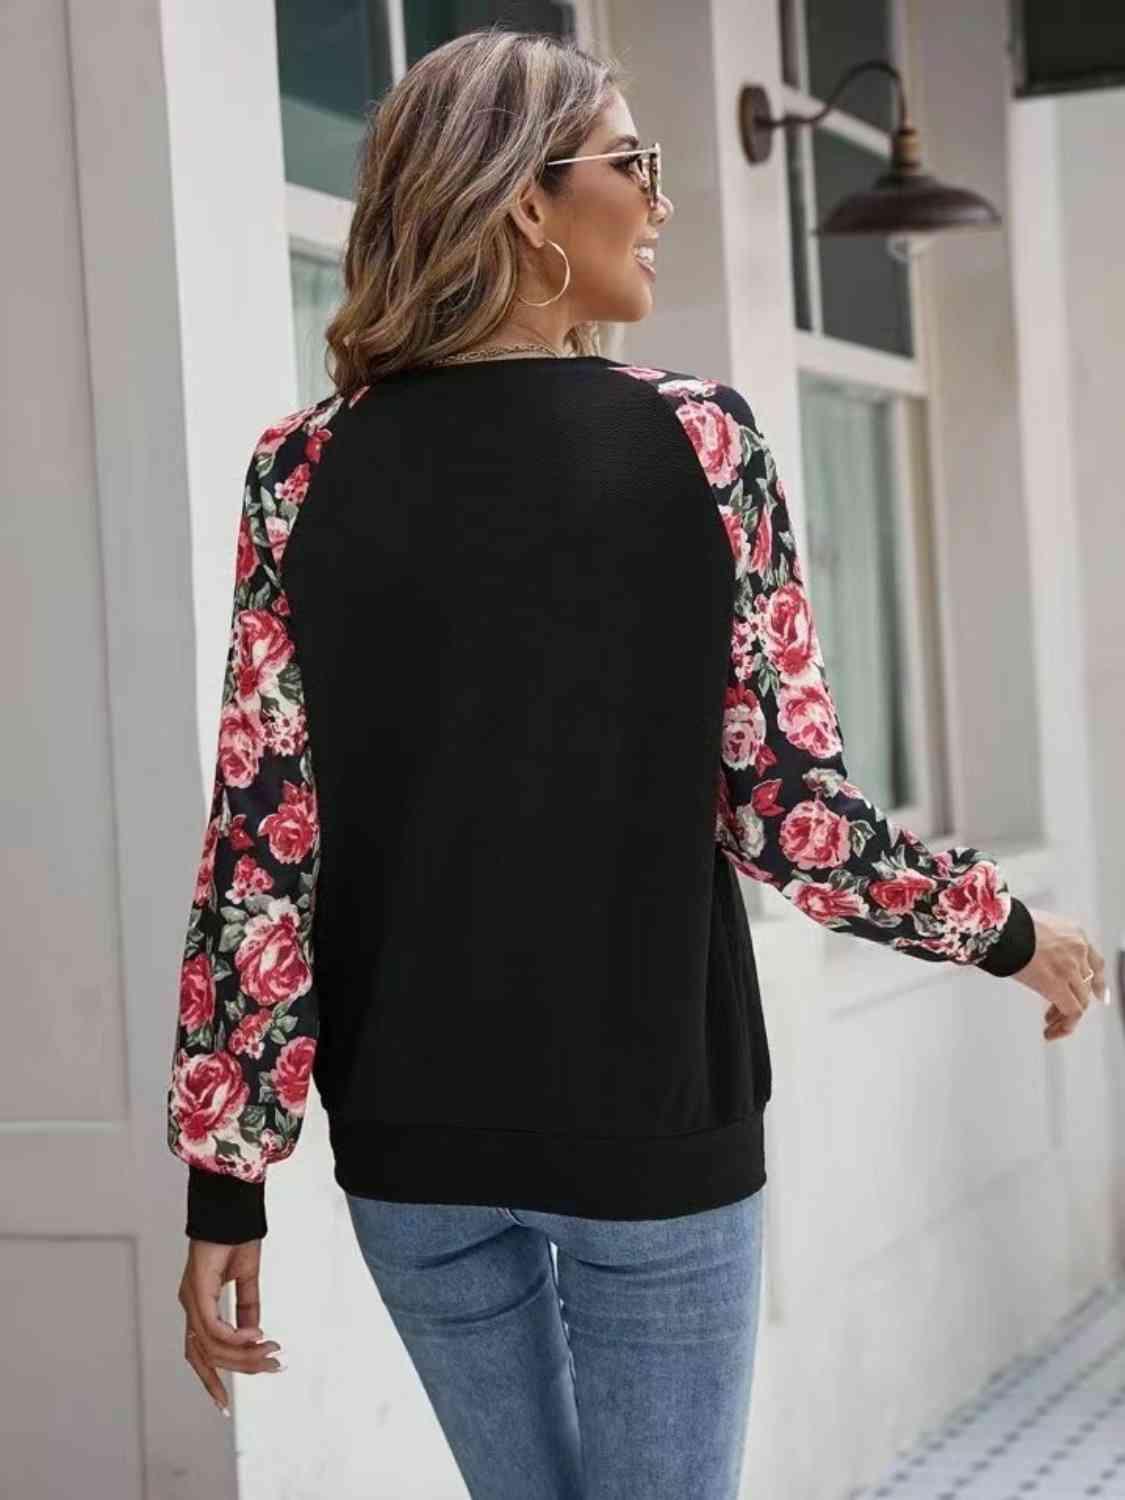 a woman walking down a sidewalk wearing a black and pink floral top